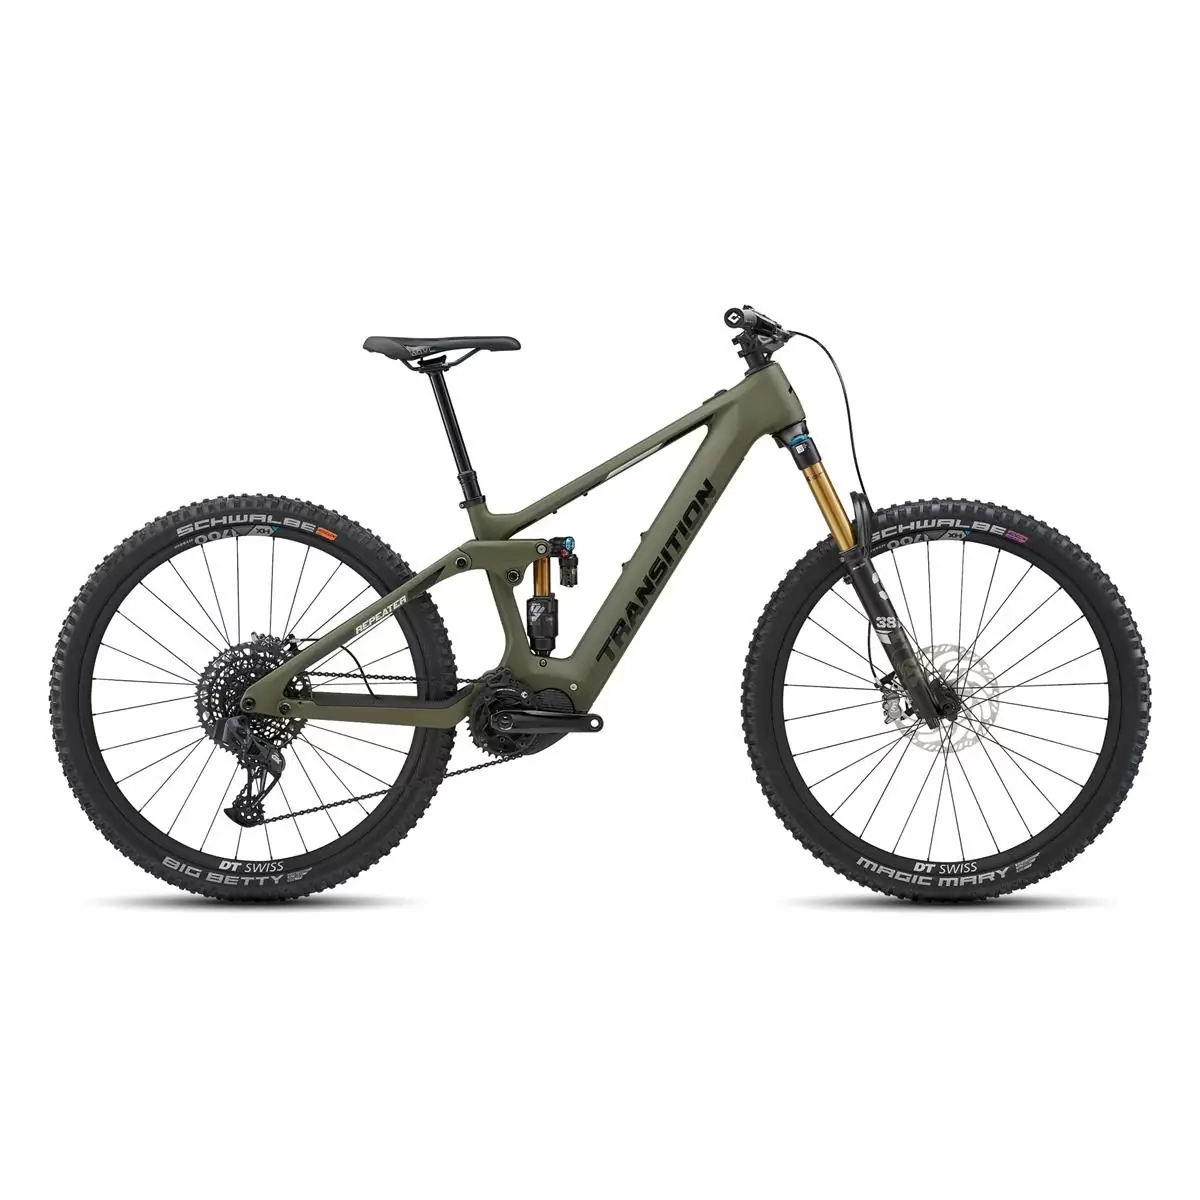 Repeater Carbon AXS 29'' 160mm 12s 630Wh Shimano EP8 Mossy Green Size L - image